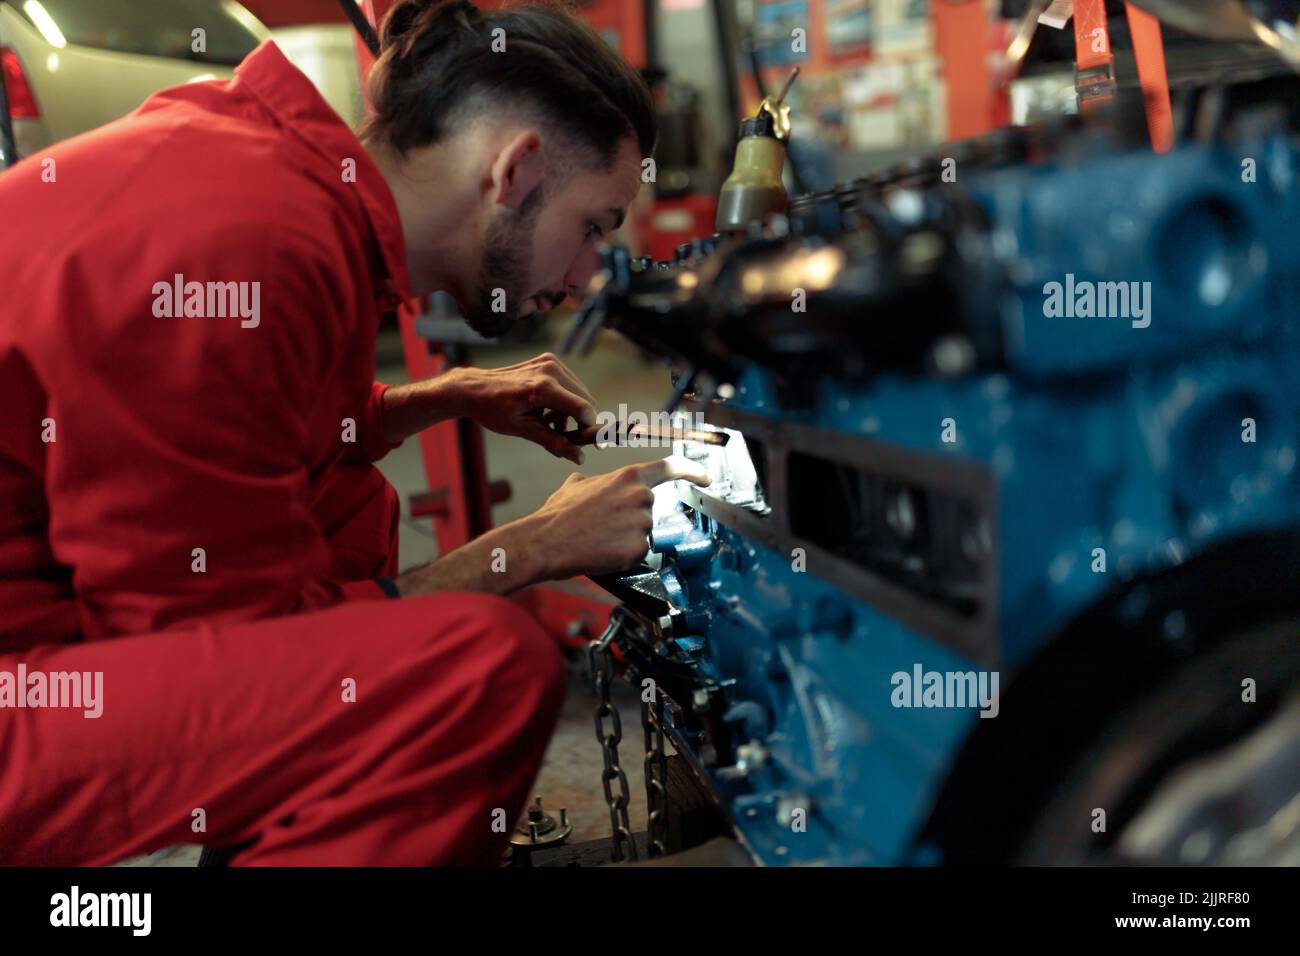 A young Caucasian mechanic mounting the car engine Stock Photo